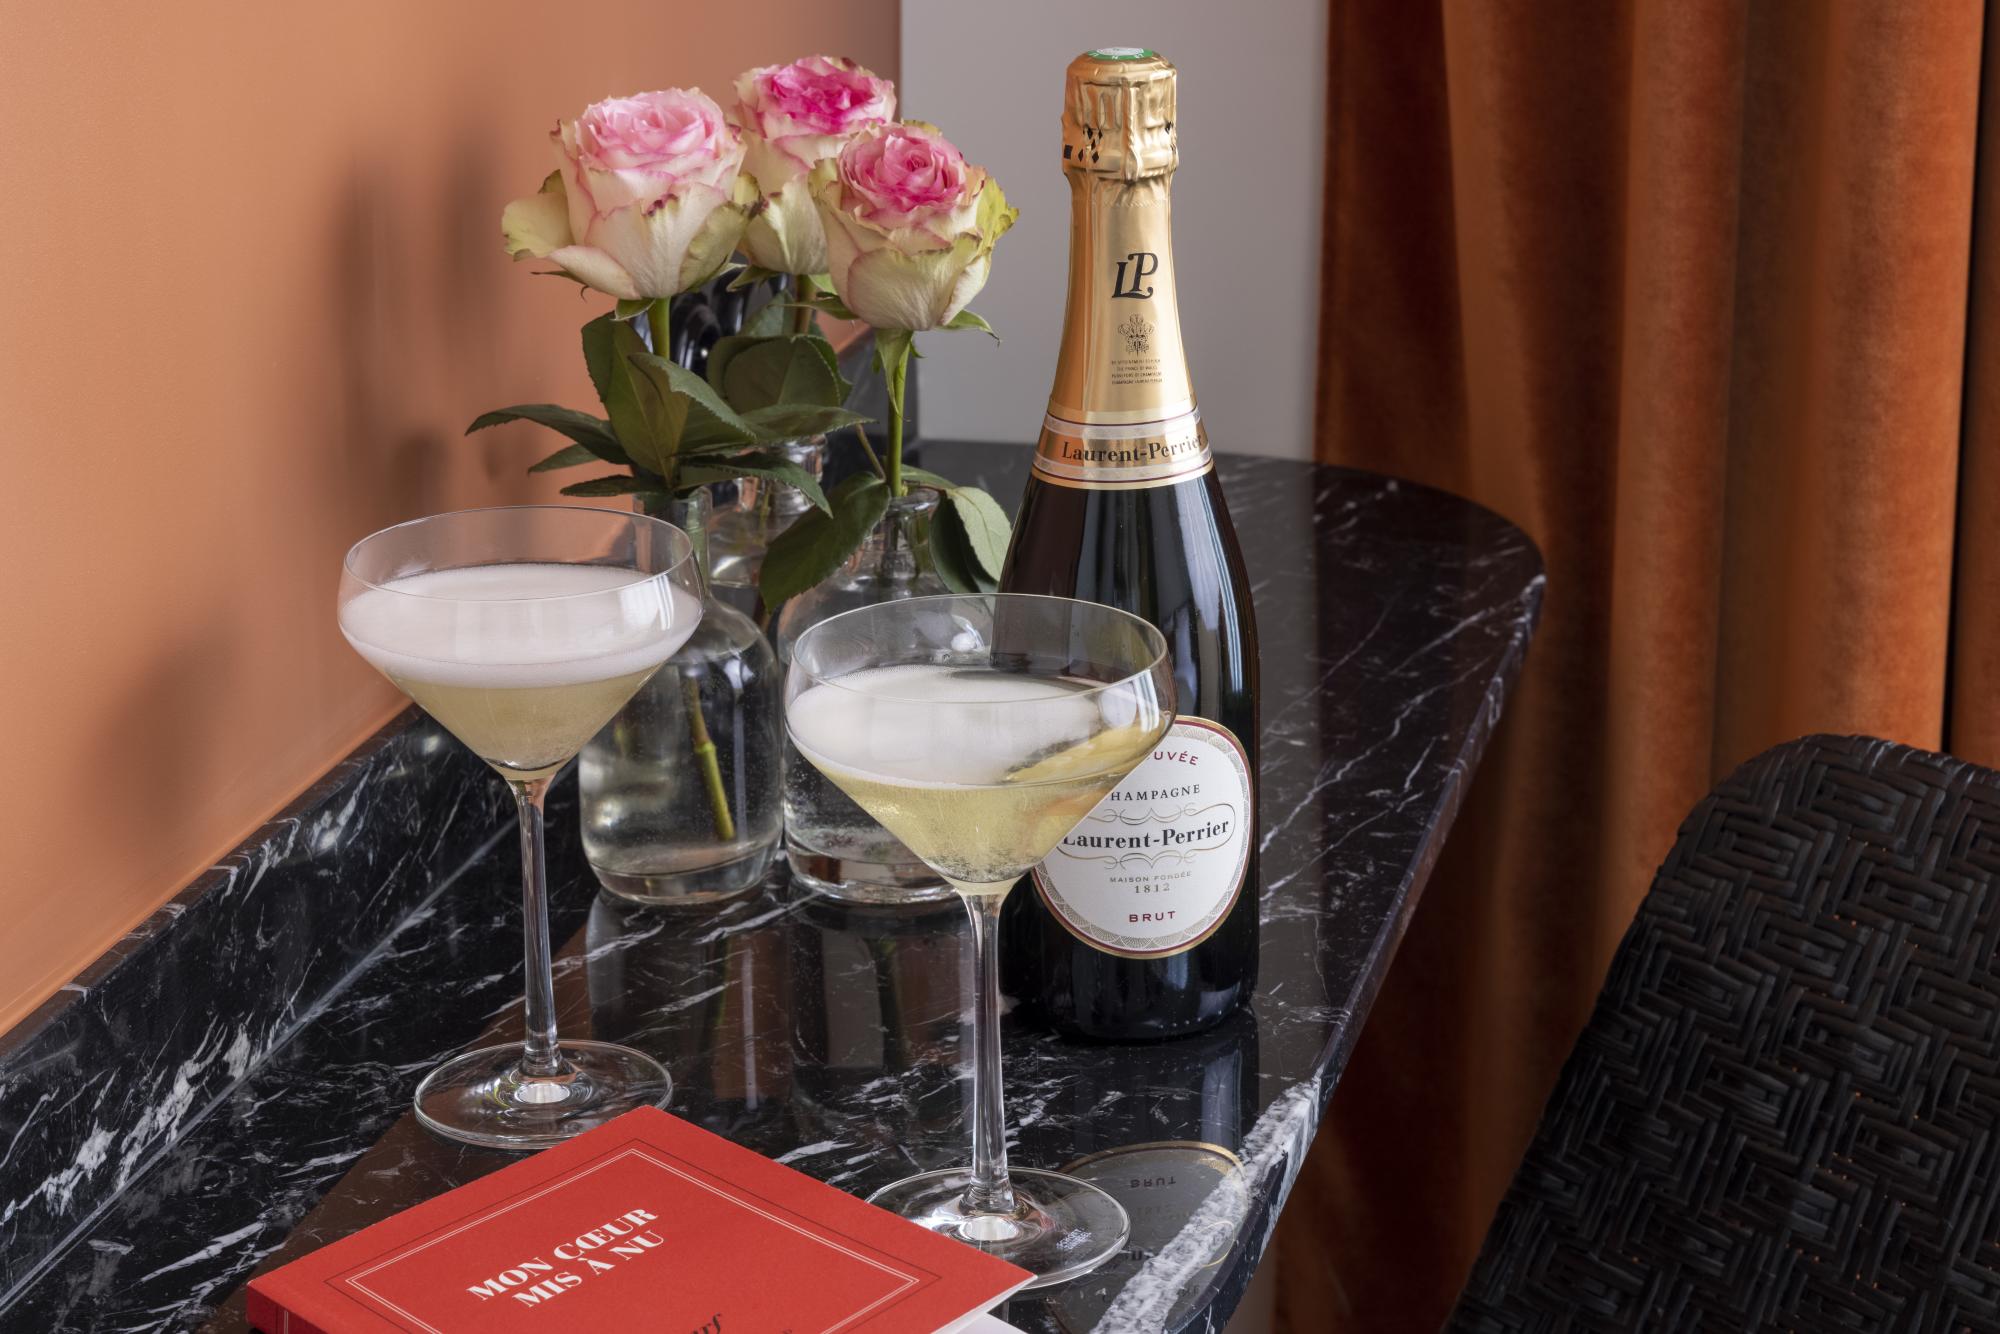 Grand Hotel Chicago Offer Package Romantic Champagne